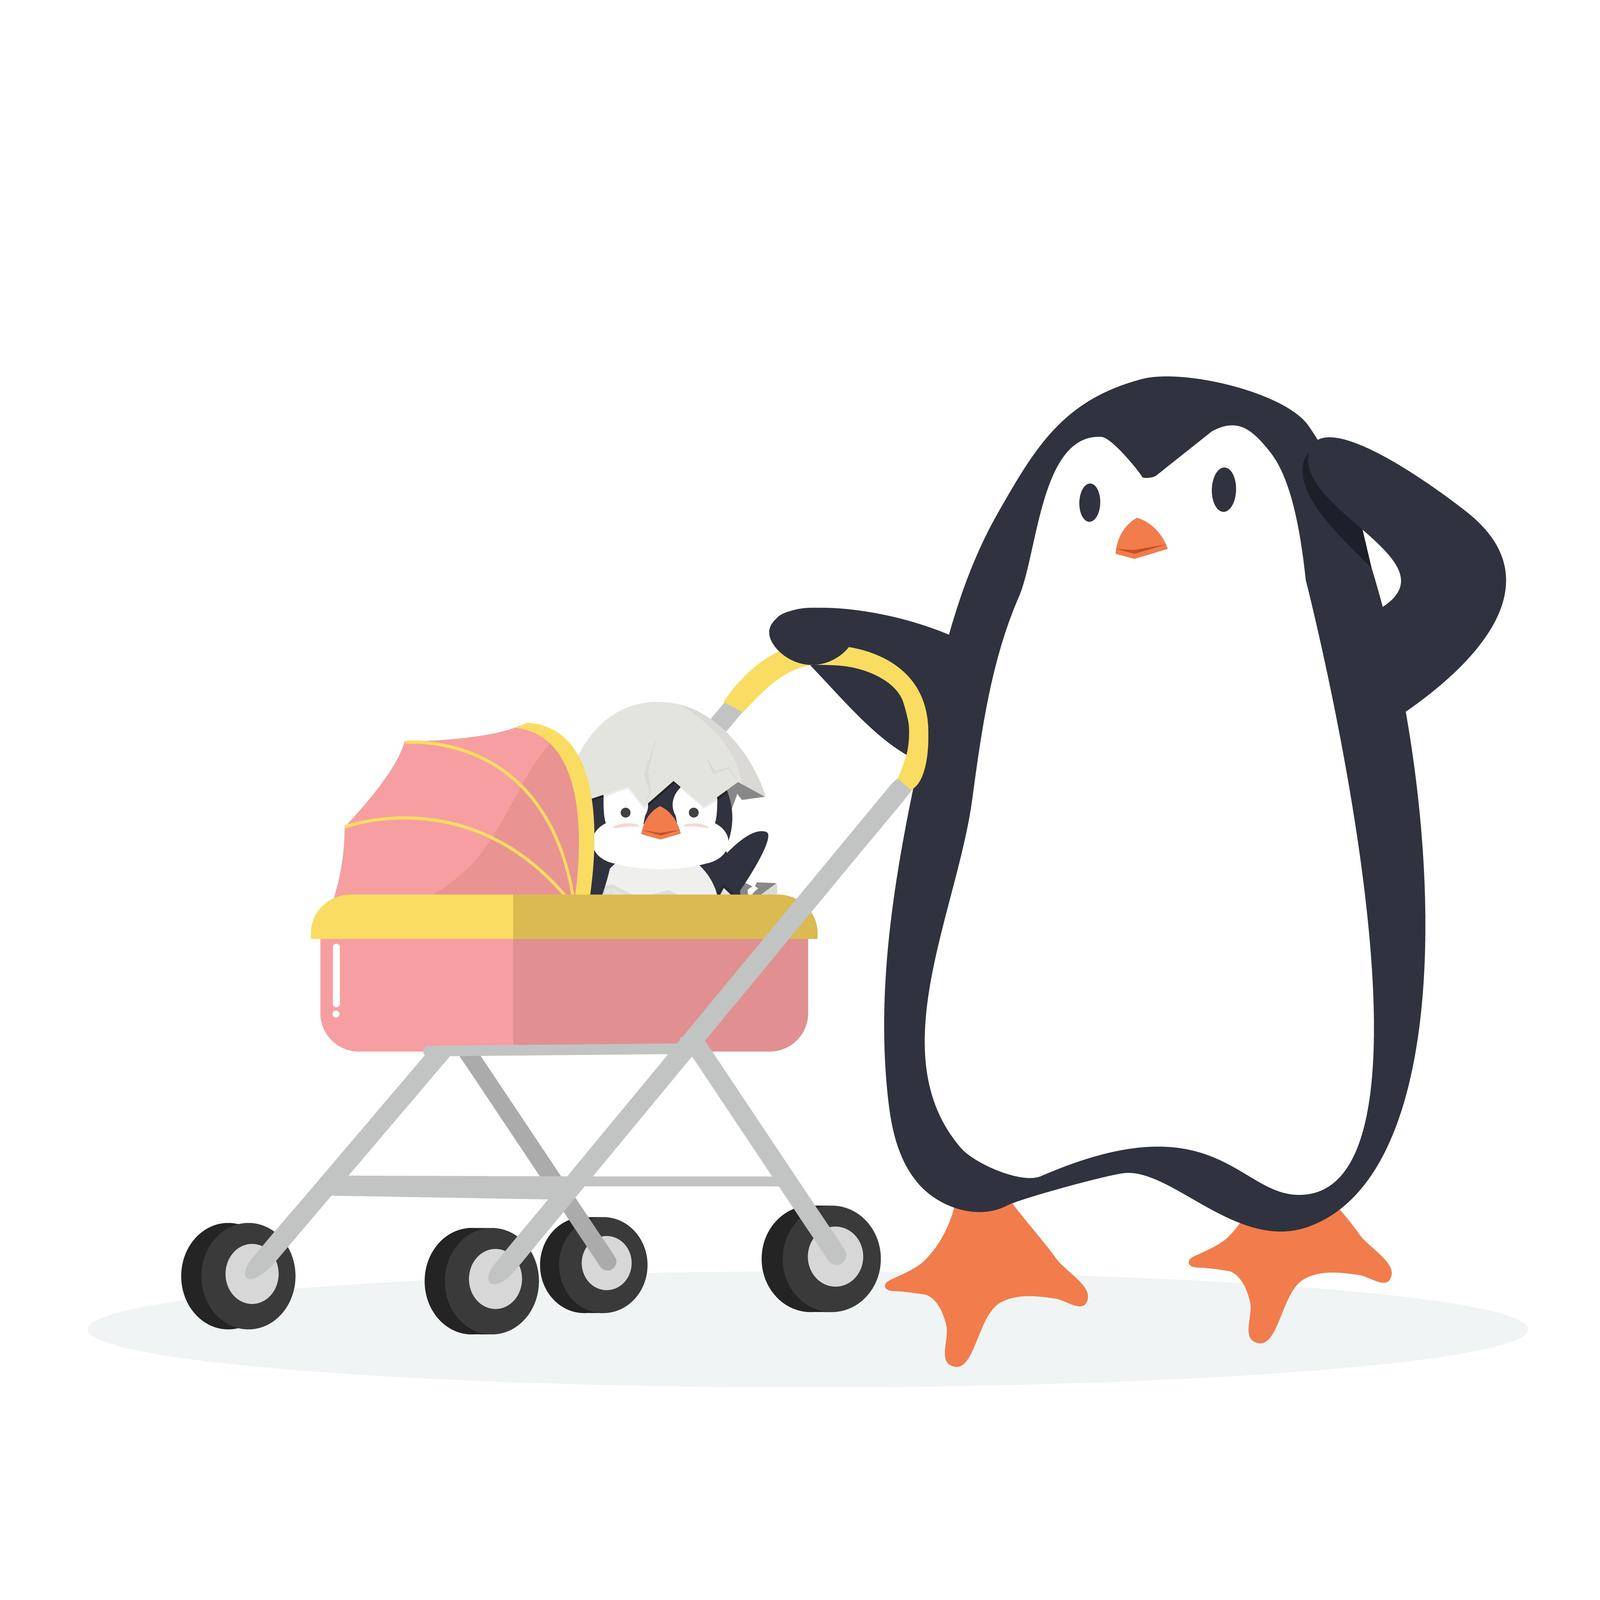 penguin with Baby penguin Carriage by focus_bell